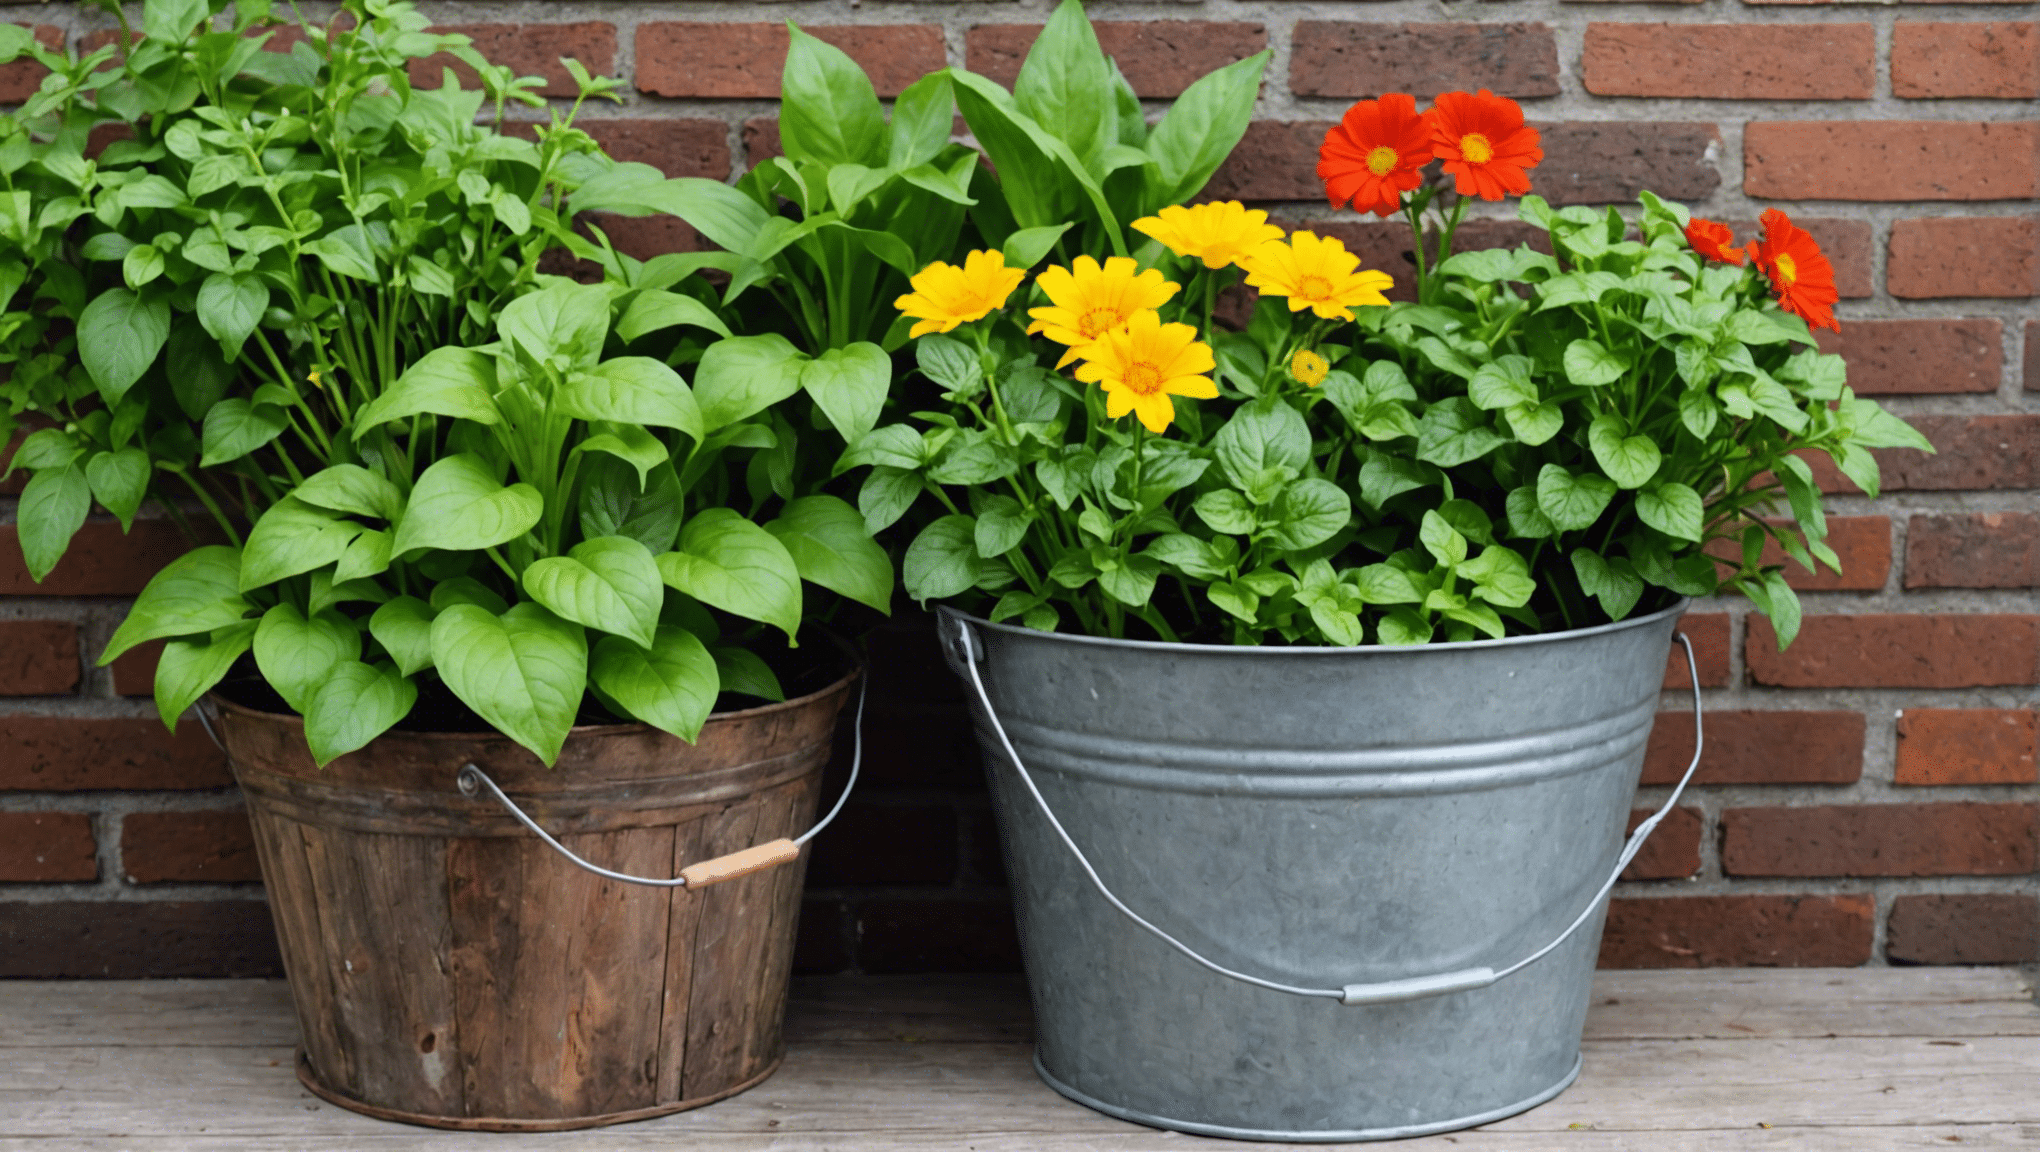 discover unique and creative bucket gardening ideas for your next gardening project. get inspired and transform your outdoor space with innovative bucket gardening techniques.